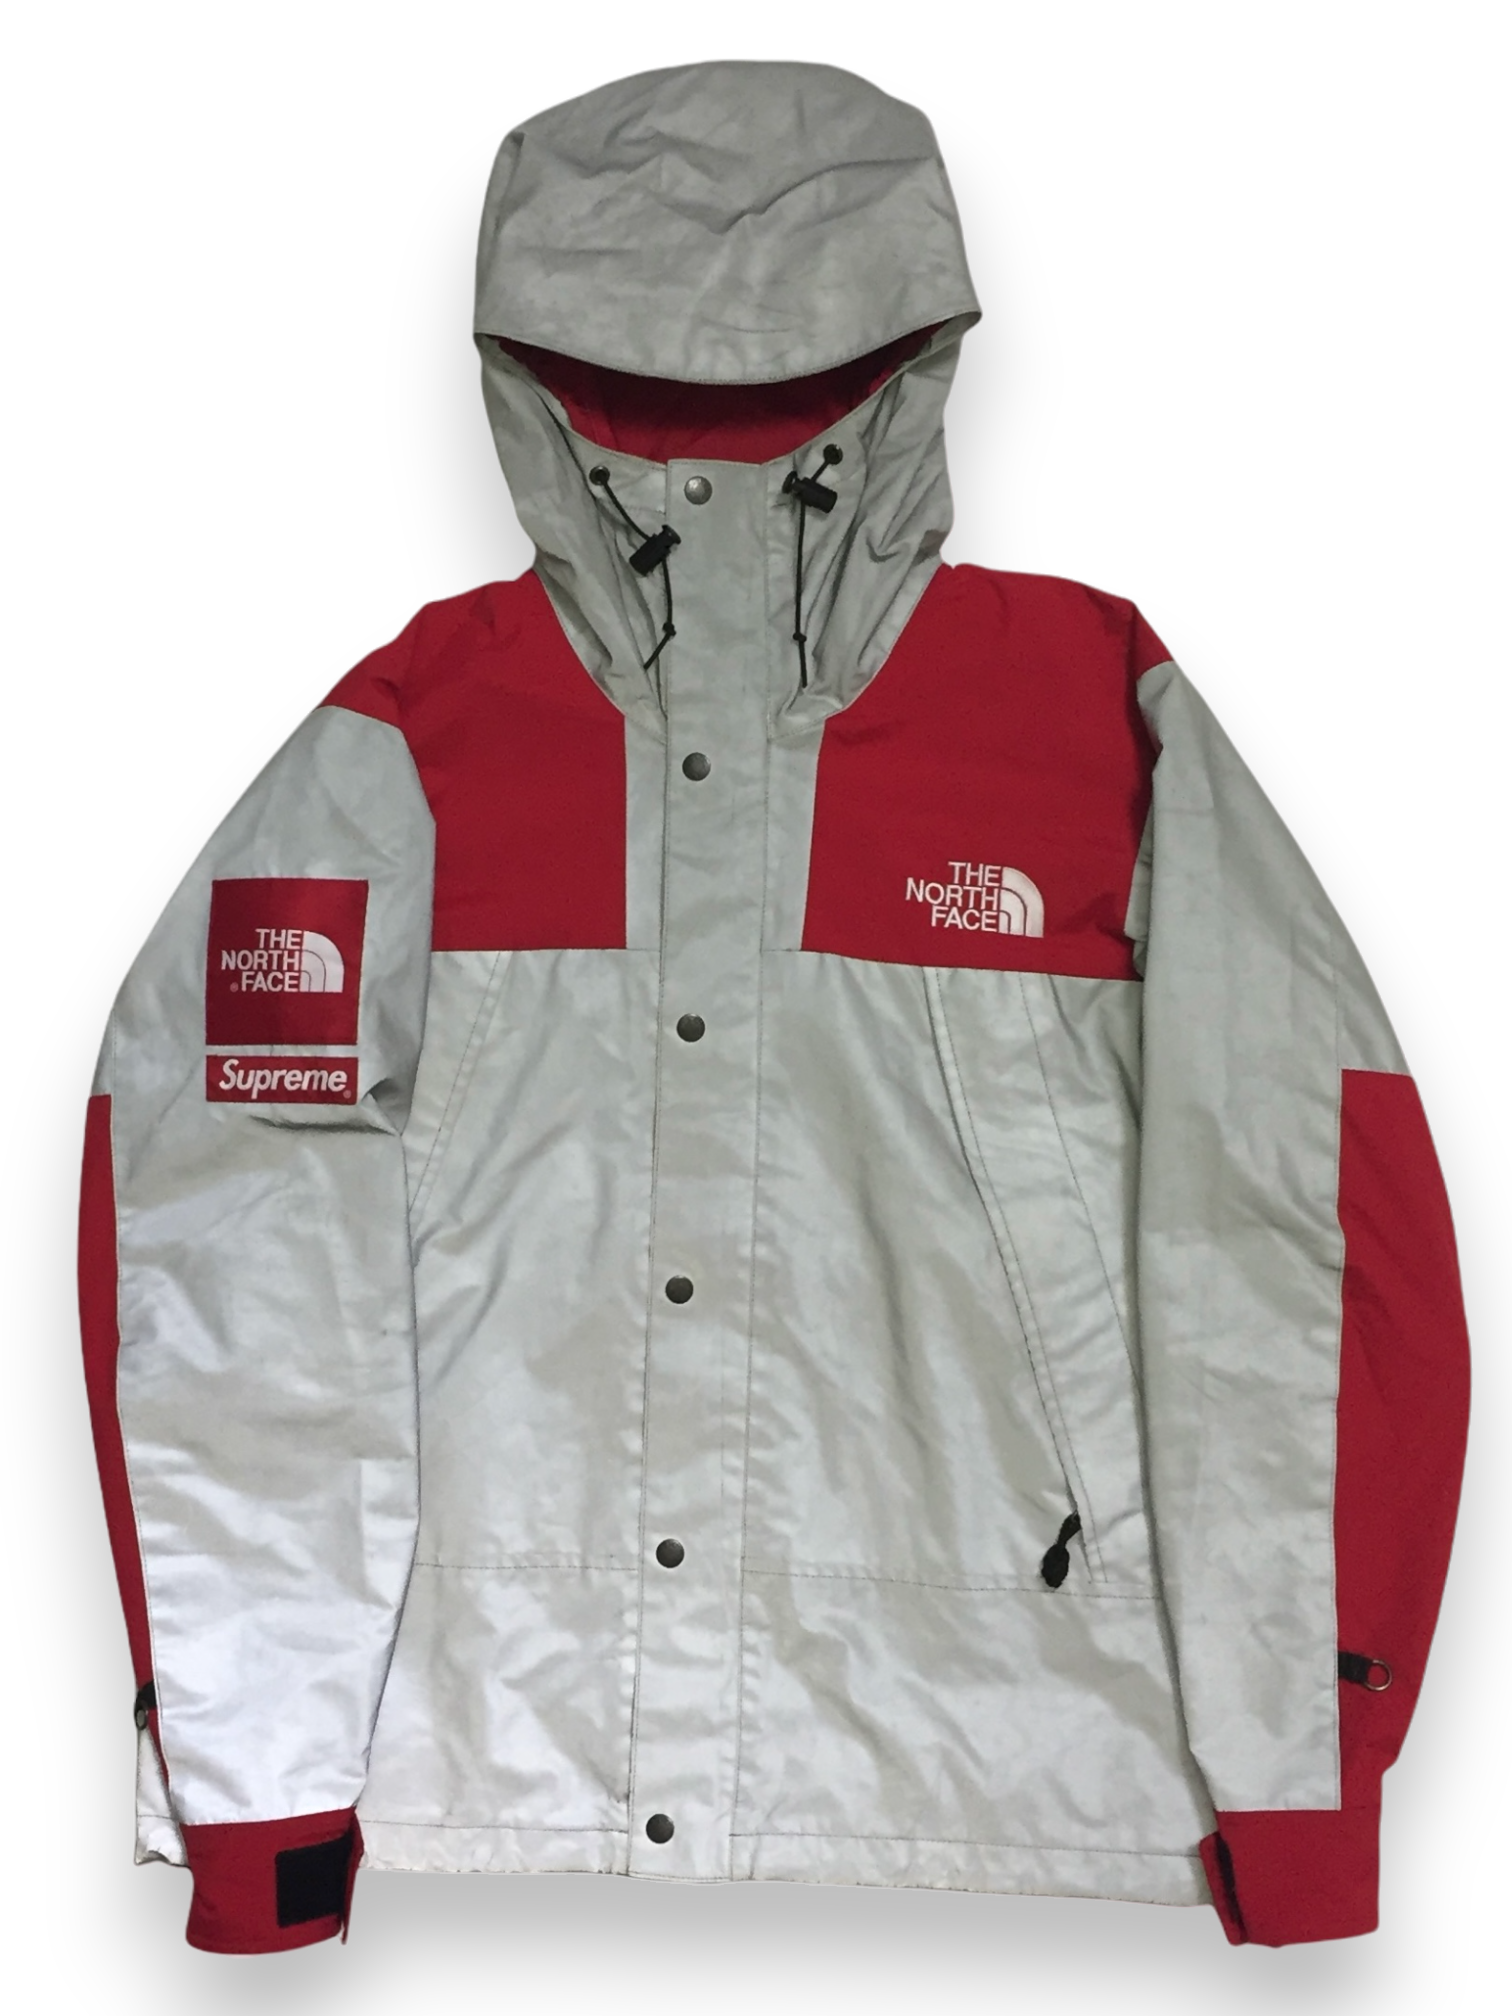 2013 Supreme x The North Face 3M Red Mountain Parka